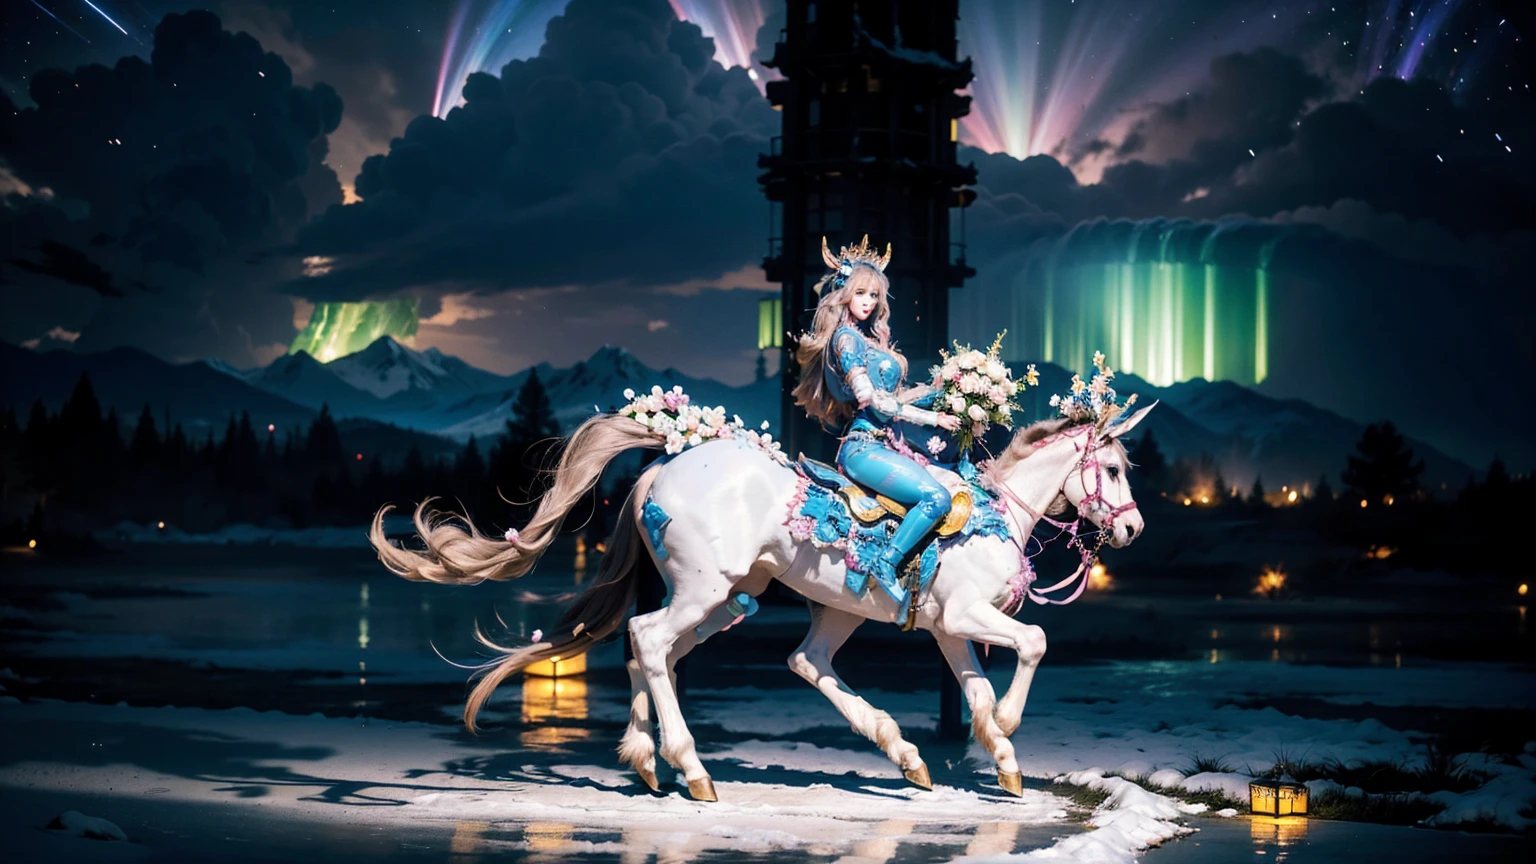 In the beautiful illustration of this super-grand scene，The ultra-distant lens shows us（More than eight distinctive and beautiful female centaurs，Half man, half horse，Half man, half horse character：9.9），Their personality、Distinctive and vivid features。from（A radiant, angelic, snow-white centaur from heaven：1.1），arrive（Nightmare-like fiery red centaur surrounded by flames：1.1）、Arrive again（Green Centaur, the wind fairy dancing in the air：1.1）、Arrive again有（One-horned blue centaur surrounded by lightning：1.1），arrive（A mechanical-style mecha Centaur shining with metallic light：1.1）、Arrive again（A powerful dragon-shaped centaur wearing colorful dragon scale leather：1.1）、Arrive again（A slender elven centaur that is graceful and agile：1.1）Gracefully wears a flower crown、arrive（Enchanting and charming Tiflin centaurs：1.1）、Arrive again（A succubus centaur with an indescribably sexy feeling：1.1）。Each Centaur character fully demonstrates his unique style。The illustration uses advanced artistic techniques and tools，Use nesting、Weaving、Splicing、perspective、interlude、Montage and other artistic techniques，Divide the scene into sections by geometric arrangement，Each part corresponds to a role，from and more efficiently utilize space，Make eight centaurs exist in one picture at the same time，（The style tends to be grotesque、Hayao Miyazaki、Aesthetic、Unavailable：3.3）。Through Midjourney's advanced brush tools、Color palette、Material packs and model packs、Texture tools，For each centaur, beautiful props are designed to increase racial characteristics、Clothing and physical features，Enhances the character's personality and visual appeal，（Stunning landscapes in illustrations，There are changing skies、rainbow、Aurora、Stars and Moon，Incorporating iconic landmarks such as Mount Everest，and fireworks、Tranquil Lake、Natural and urban elements of waves and neon lights，Creates a magical atmosphere：1.5），Centaurs demonstrate their unique abilities and equipment in a variety of environments，This is true even in extreme alien landscapes。Use Midjourney's toolaterial packs、Texture tools、The color palette makes depicting details vivid and realistic，from complex hairstyles and different ethnic characteristics、Body、Appearance features、Clothing arrives with realistic textures，Greatly improved the realism of the Centaurs and their surroundings，The fusion of multiple art styles adds dynamism to the character&#39;s movement at all angles，The overall visual experience is further enriched。The final illustration was described as a "masterpiece"，It has the characteristics of "best quality" and "realistic"，The details put into the creative process are shown、Level of creativity and craftsmanship。 hdr，（Reality，Masterpiece quality，Best quality）